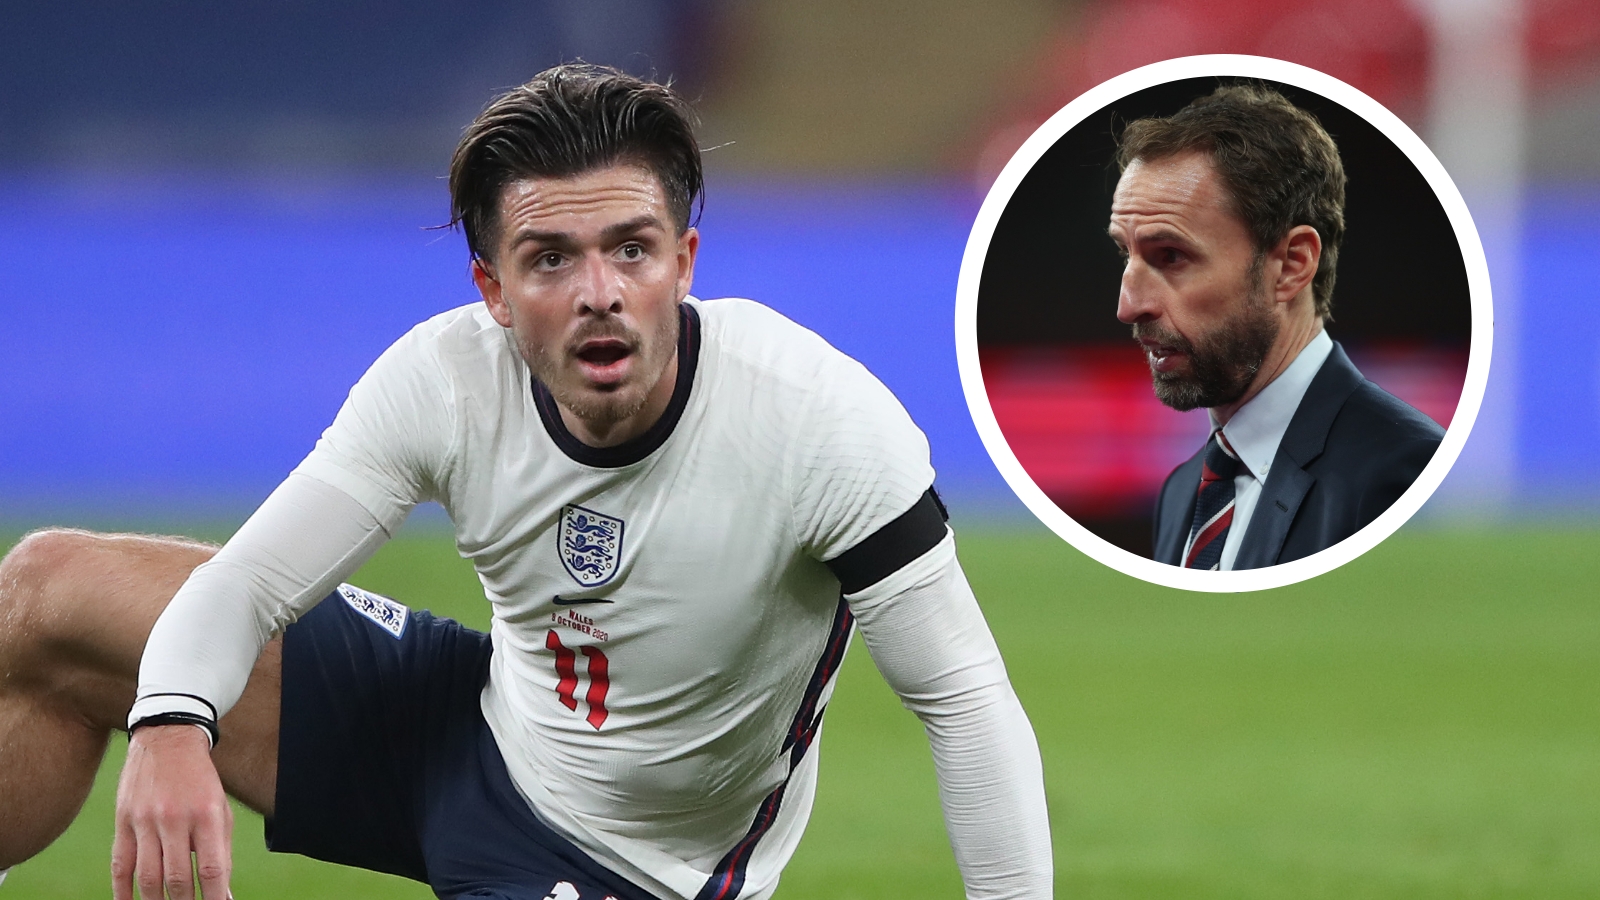 ‘Southgate clearly has an issue with Grealish’ – Agbonlahor stunned by Aston Villa star’s England omission